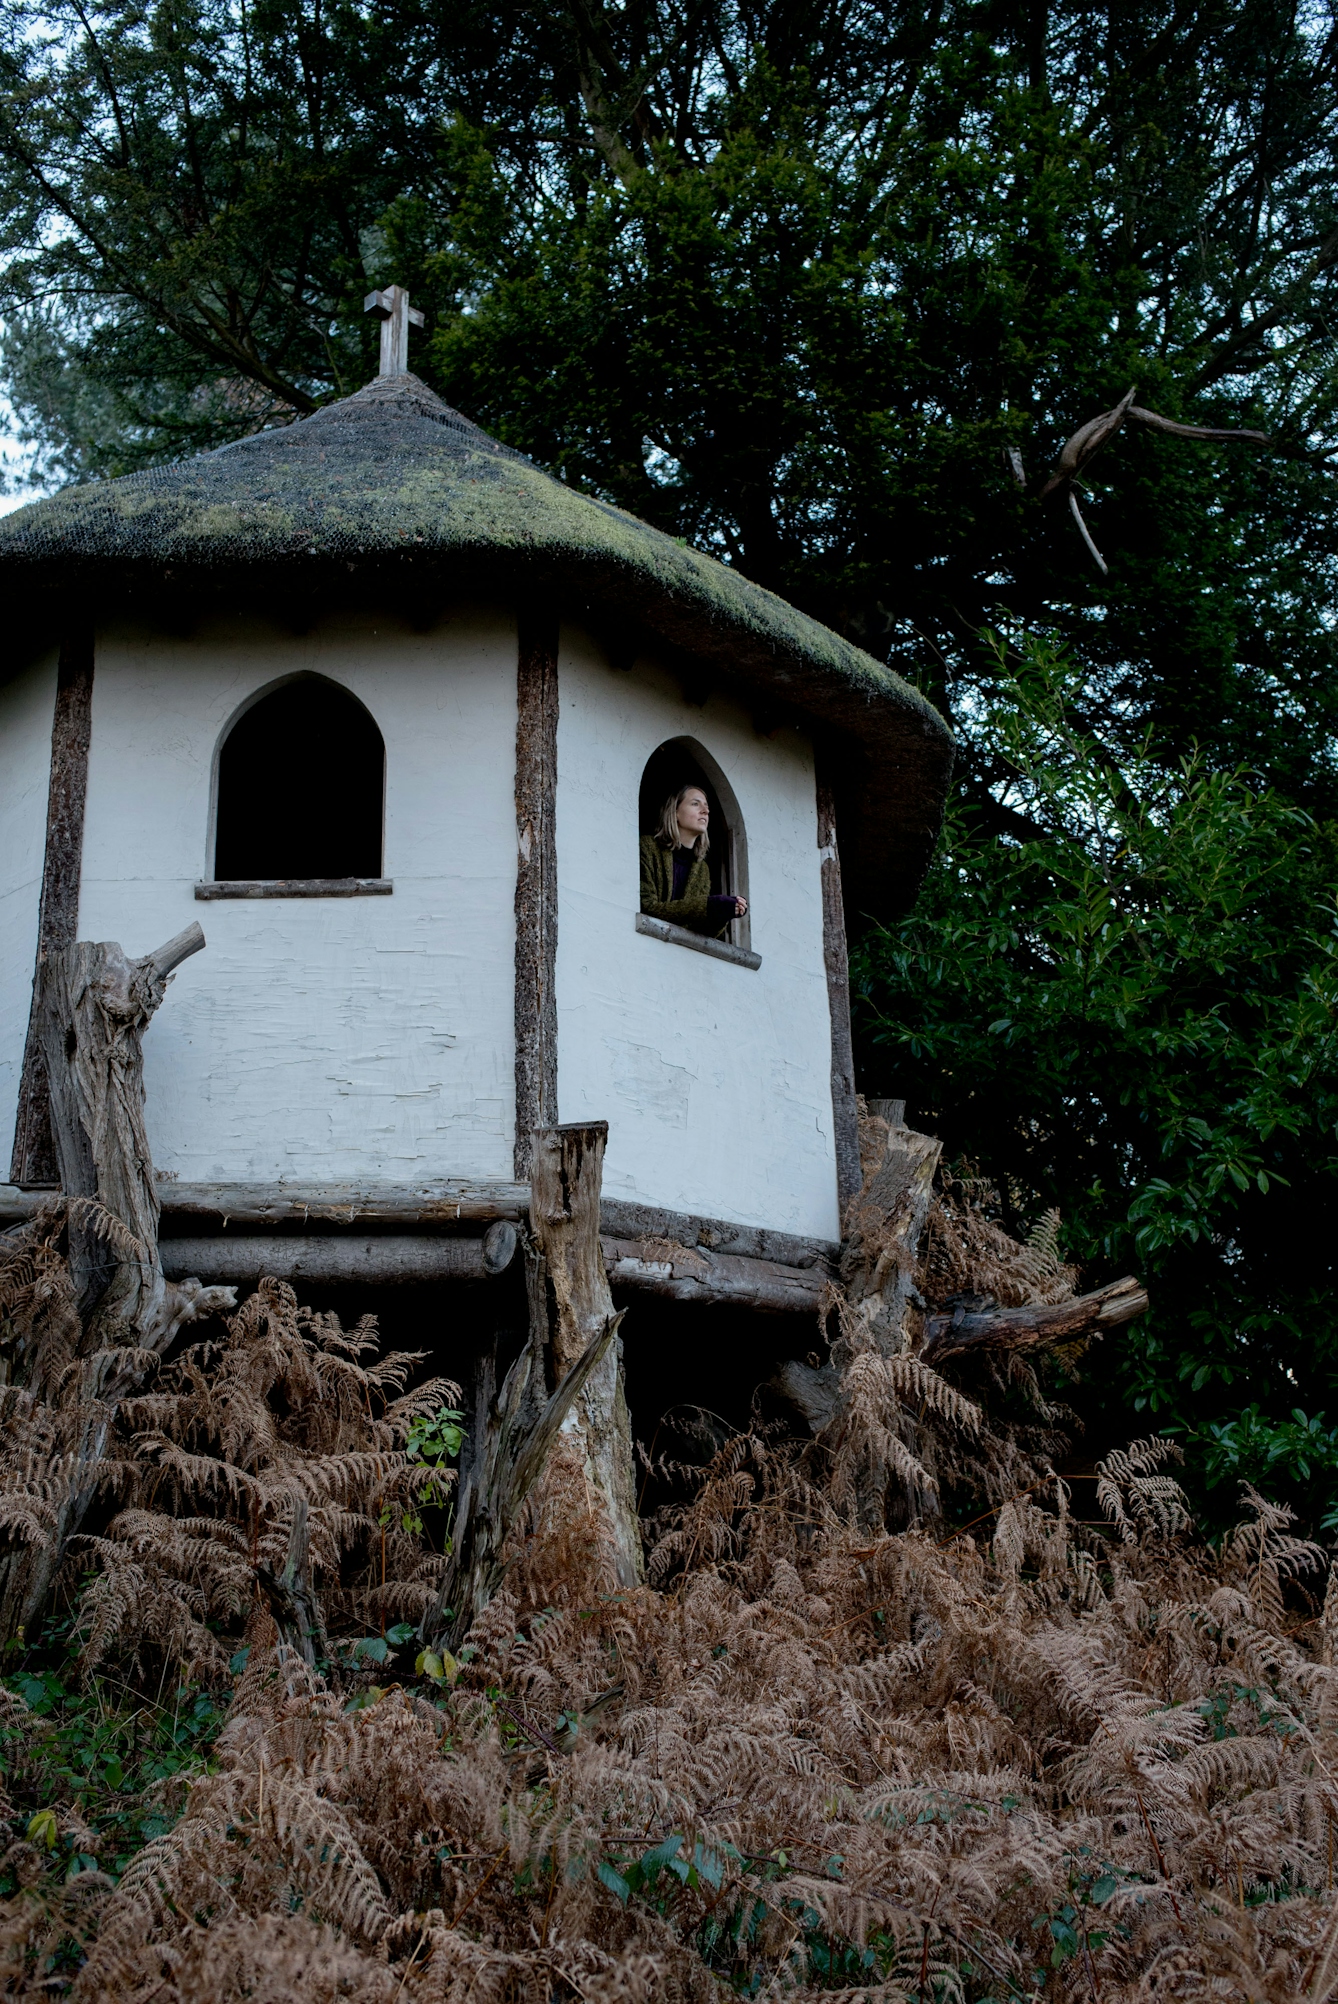 Photograph of a young woman sitting looking out of the window of a hermit's hut, set in woodland.